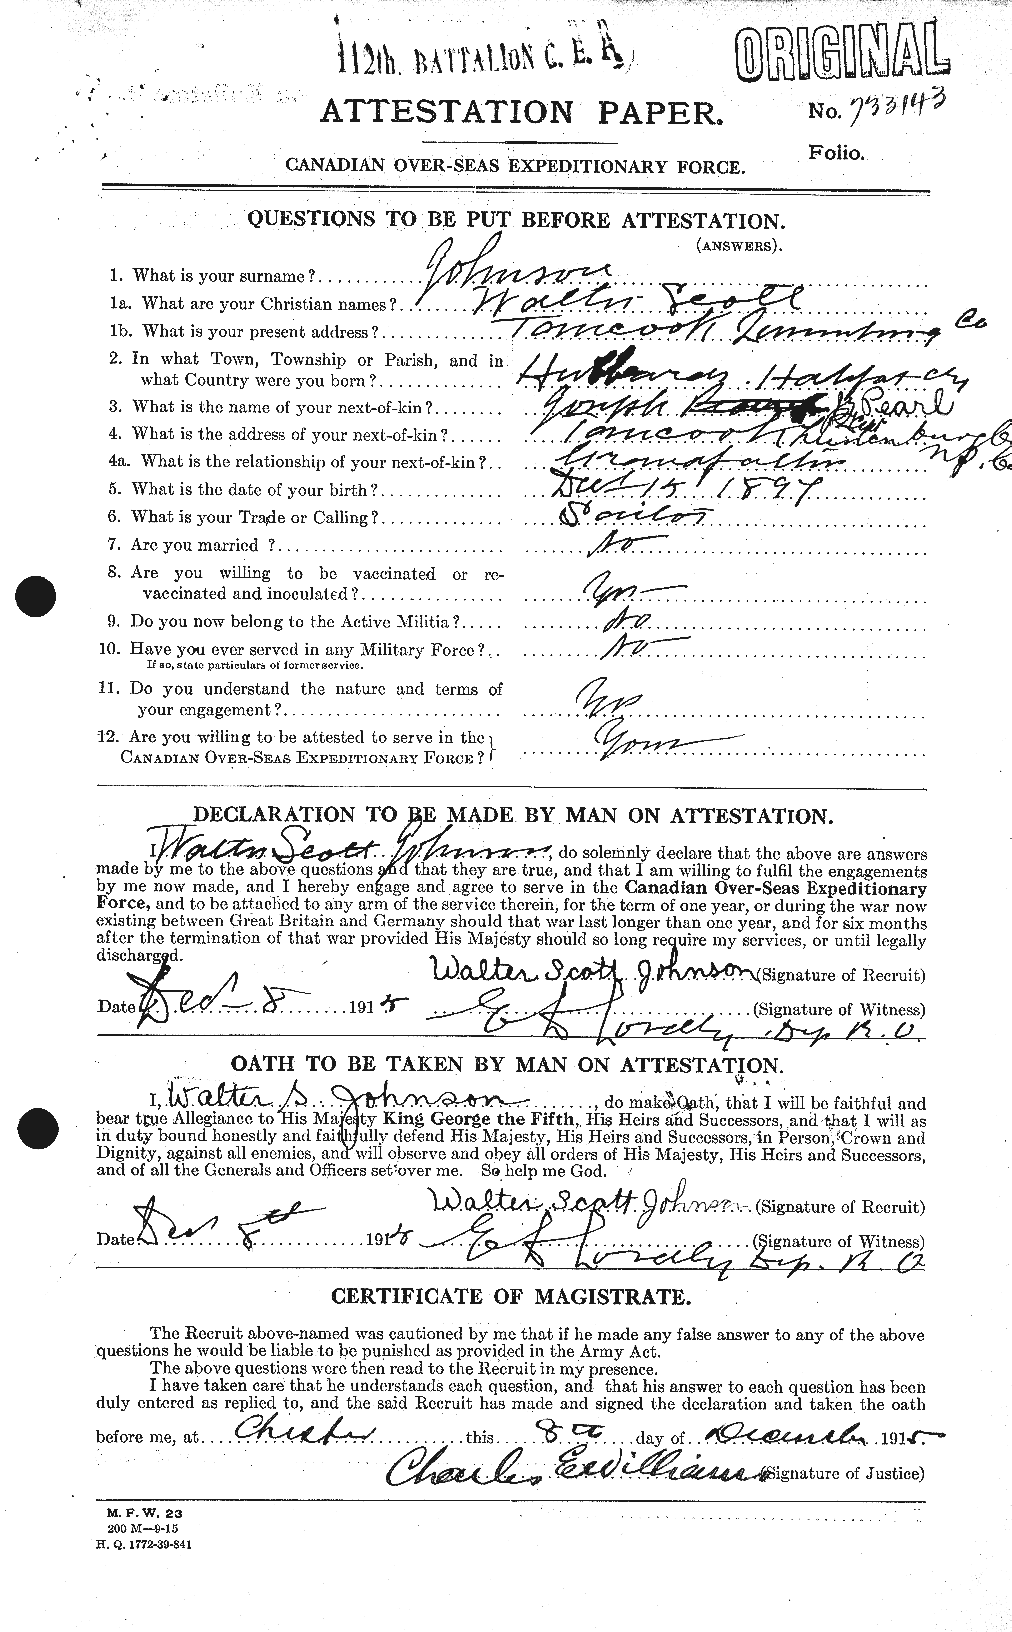 Personnel Records of the First World War - CEF 420738a